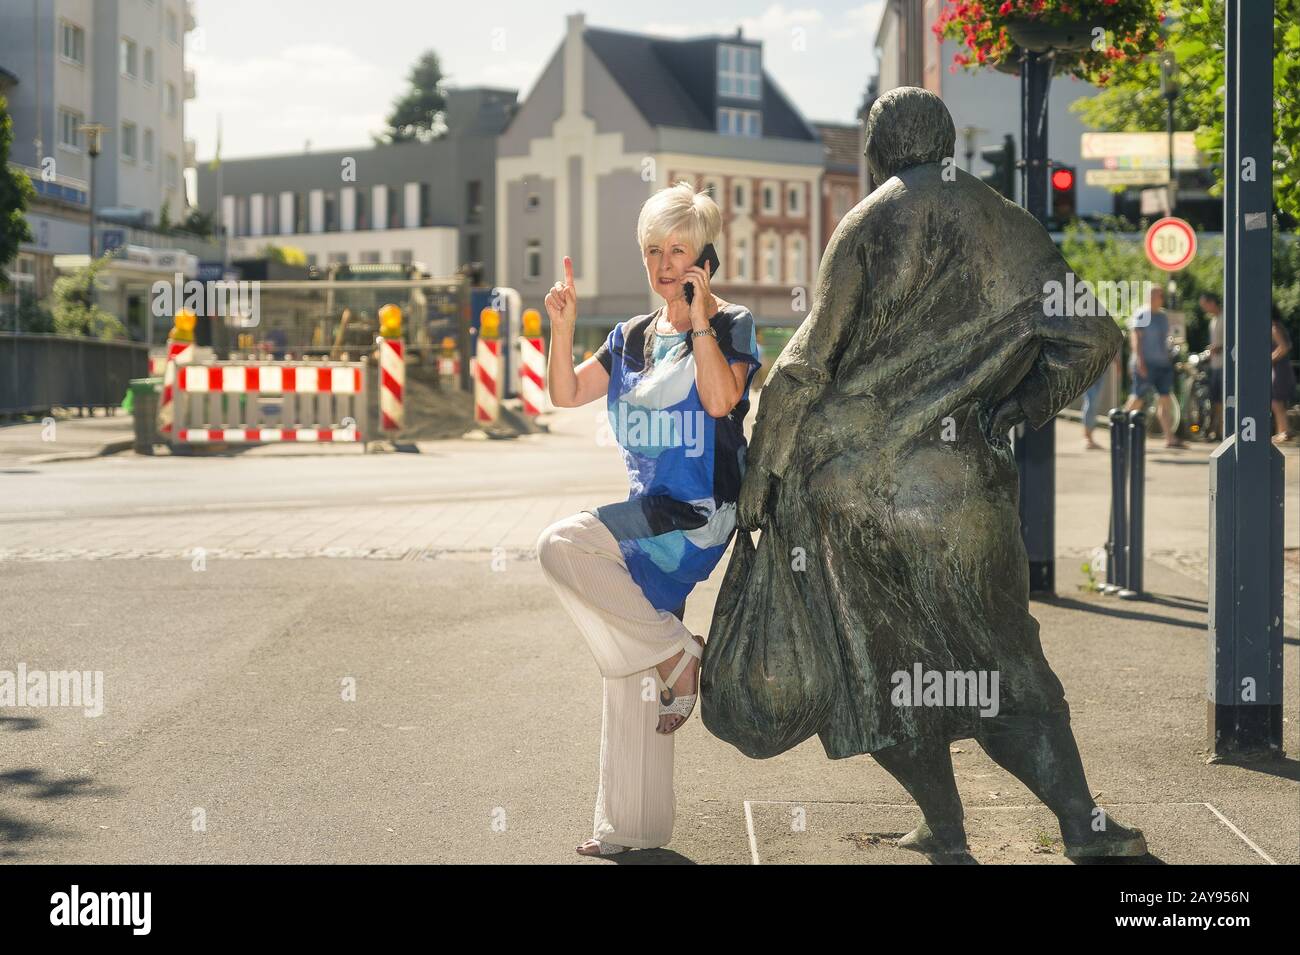 A senior citizen leans against a bronze figure and calls on a smartphone. Stock Photo